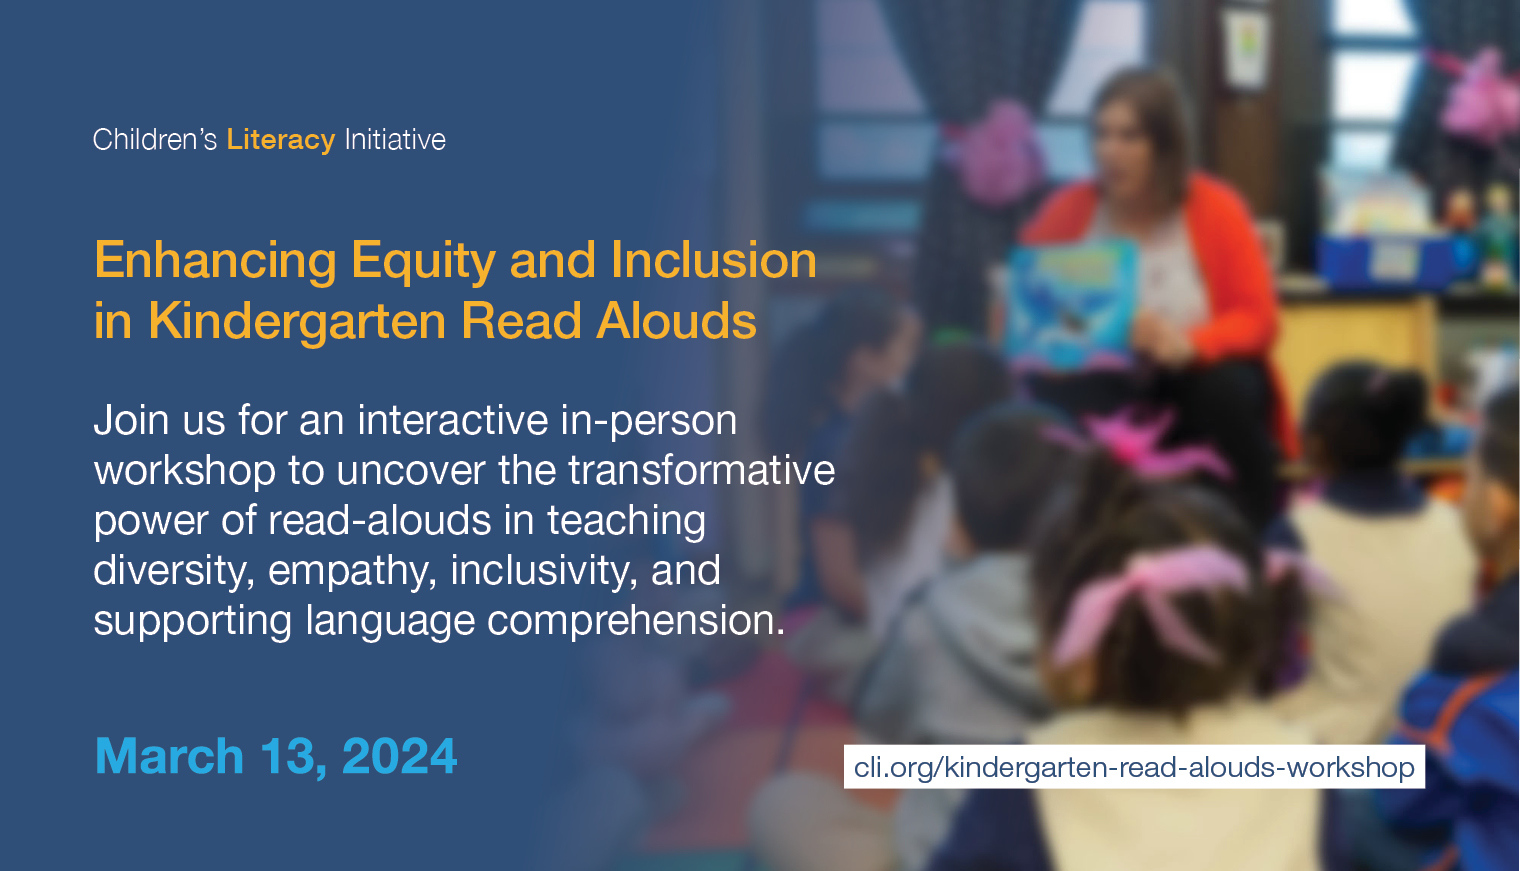 Enhancing Equity and Inclusion in Kindergarten Read Alouds